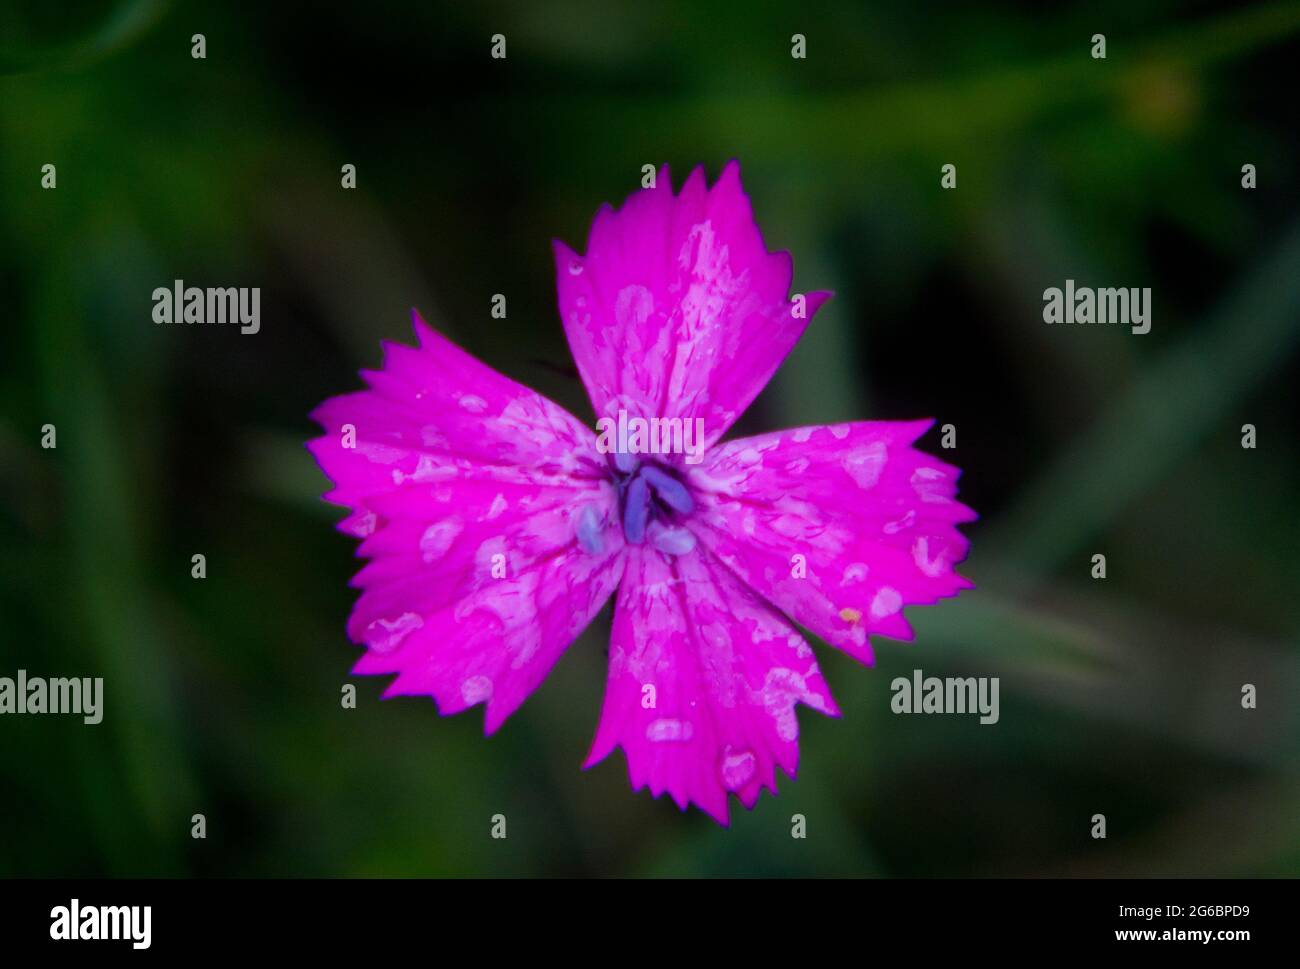 Pink flower of Alpine pink, some waterdrops on it, isolated against a dark background Stock Photo